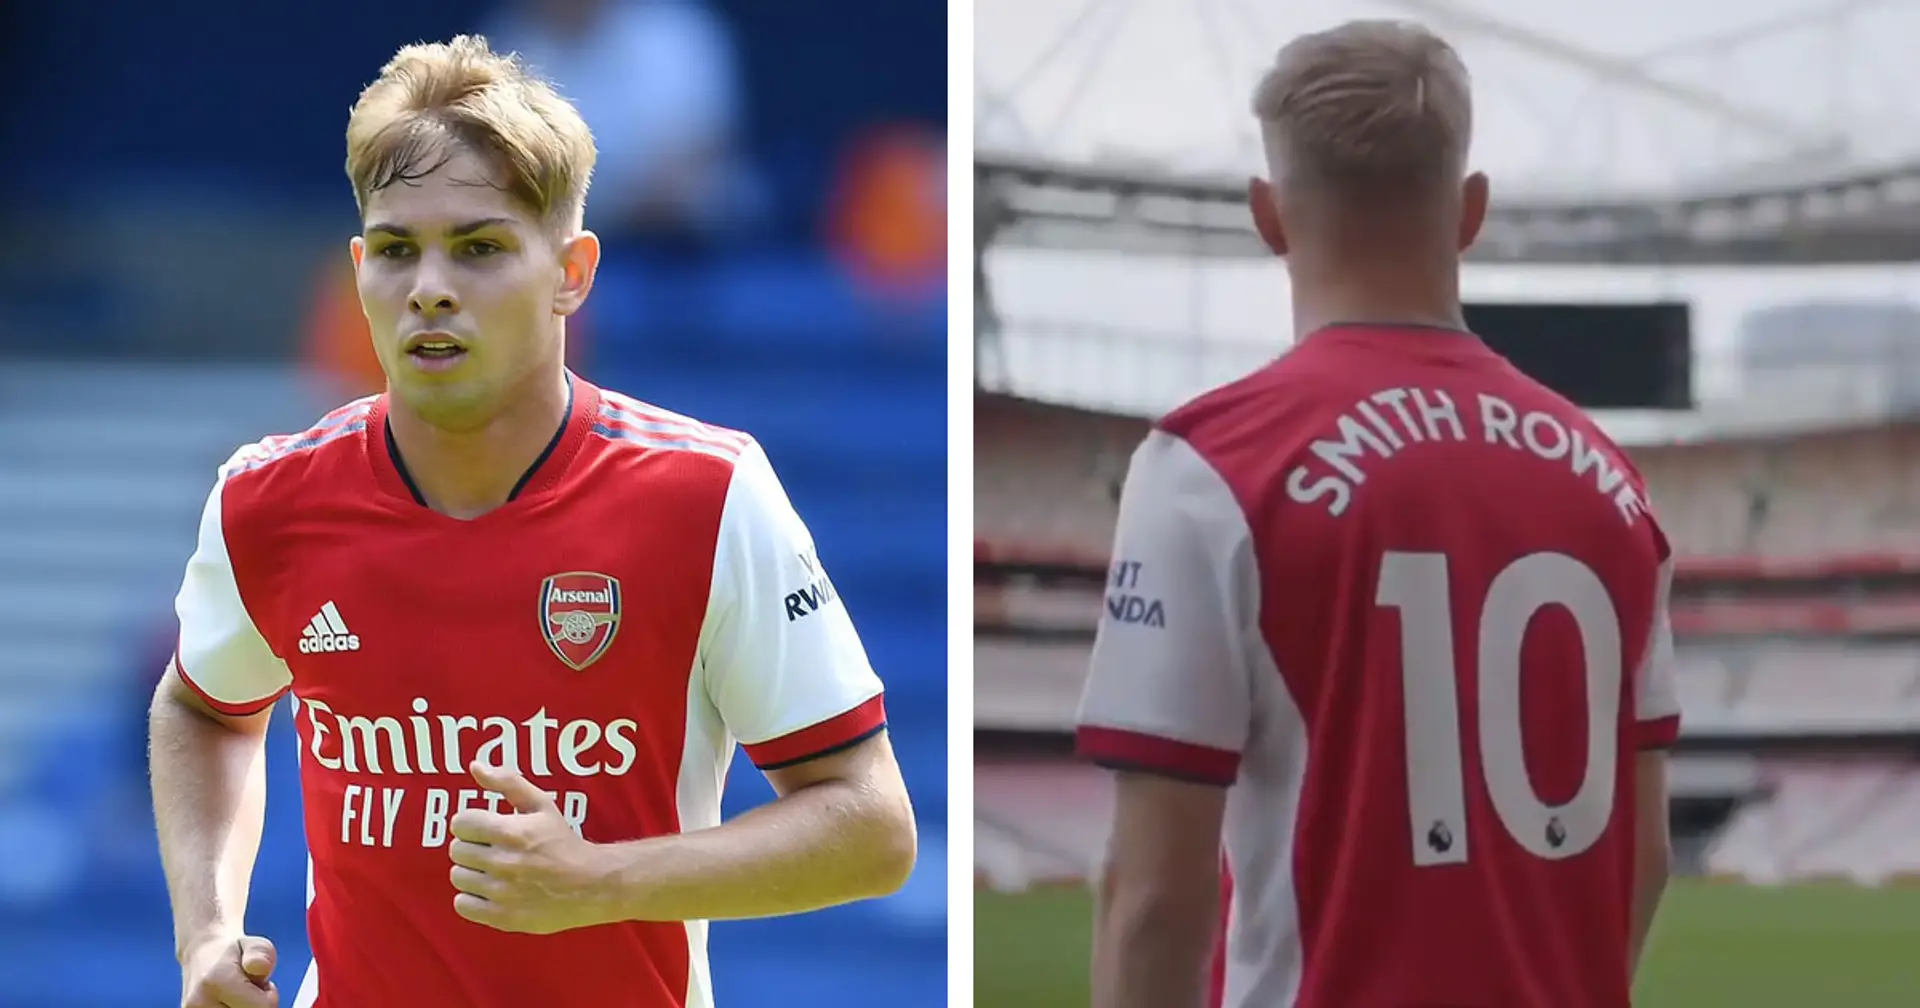 OFFICIAL: Smith Rowe signs long-term contract, unveiled as Arsenal's new no.10